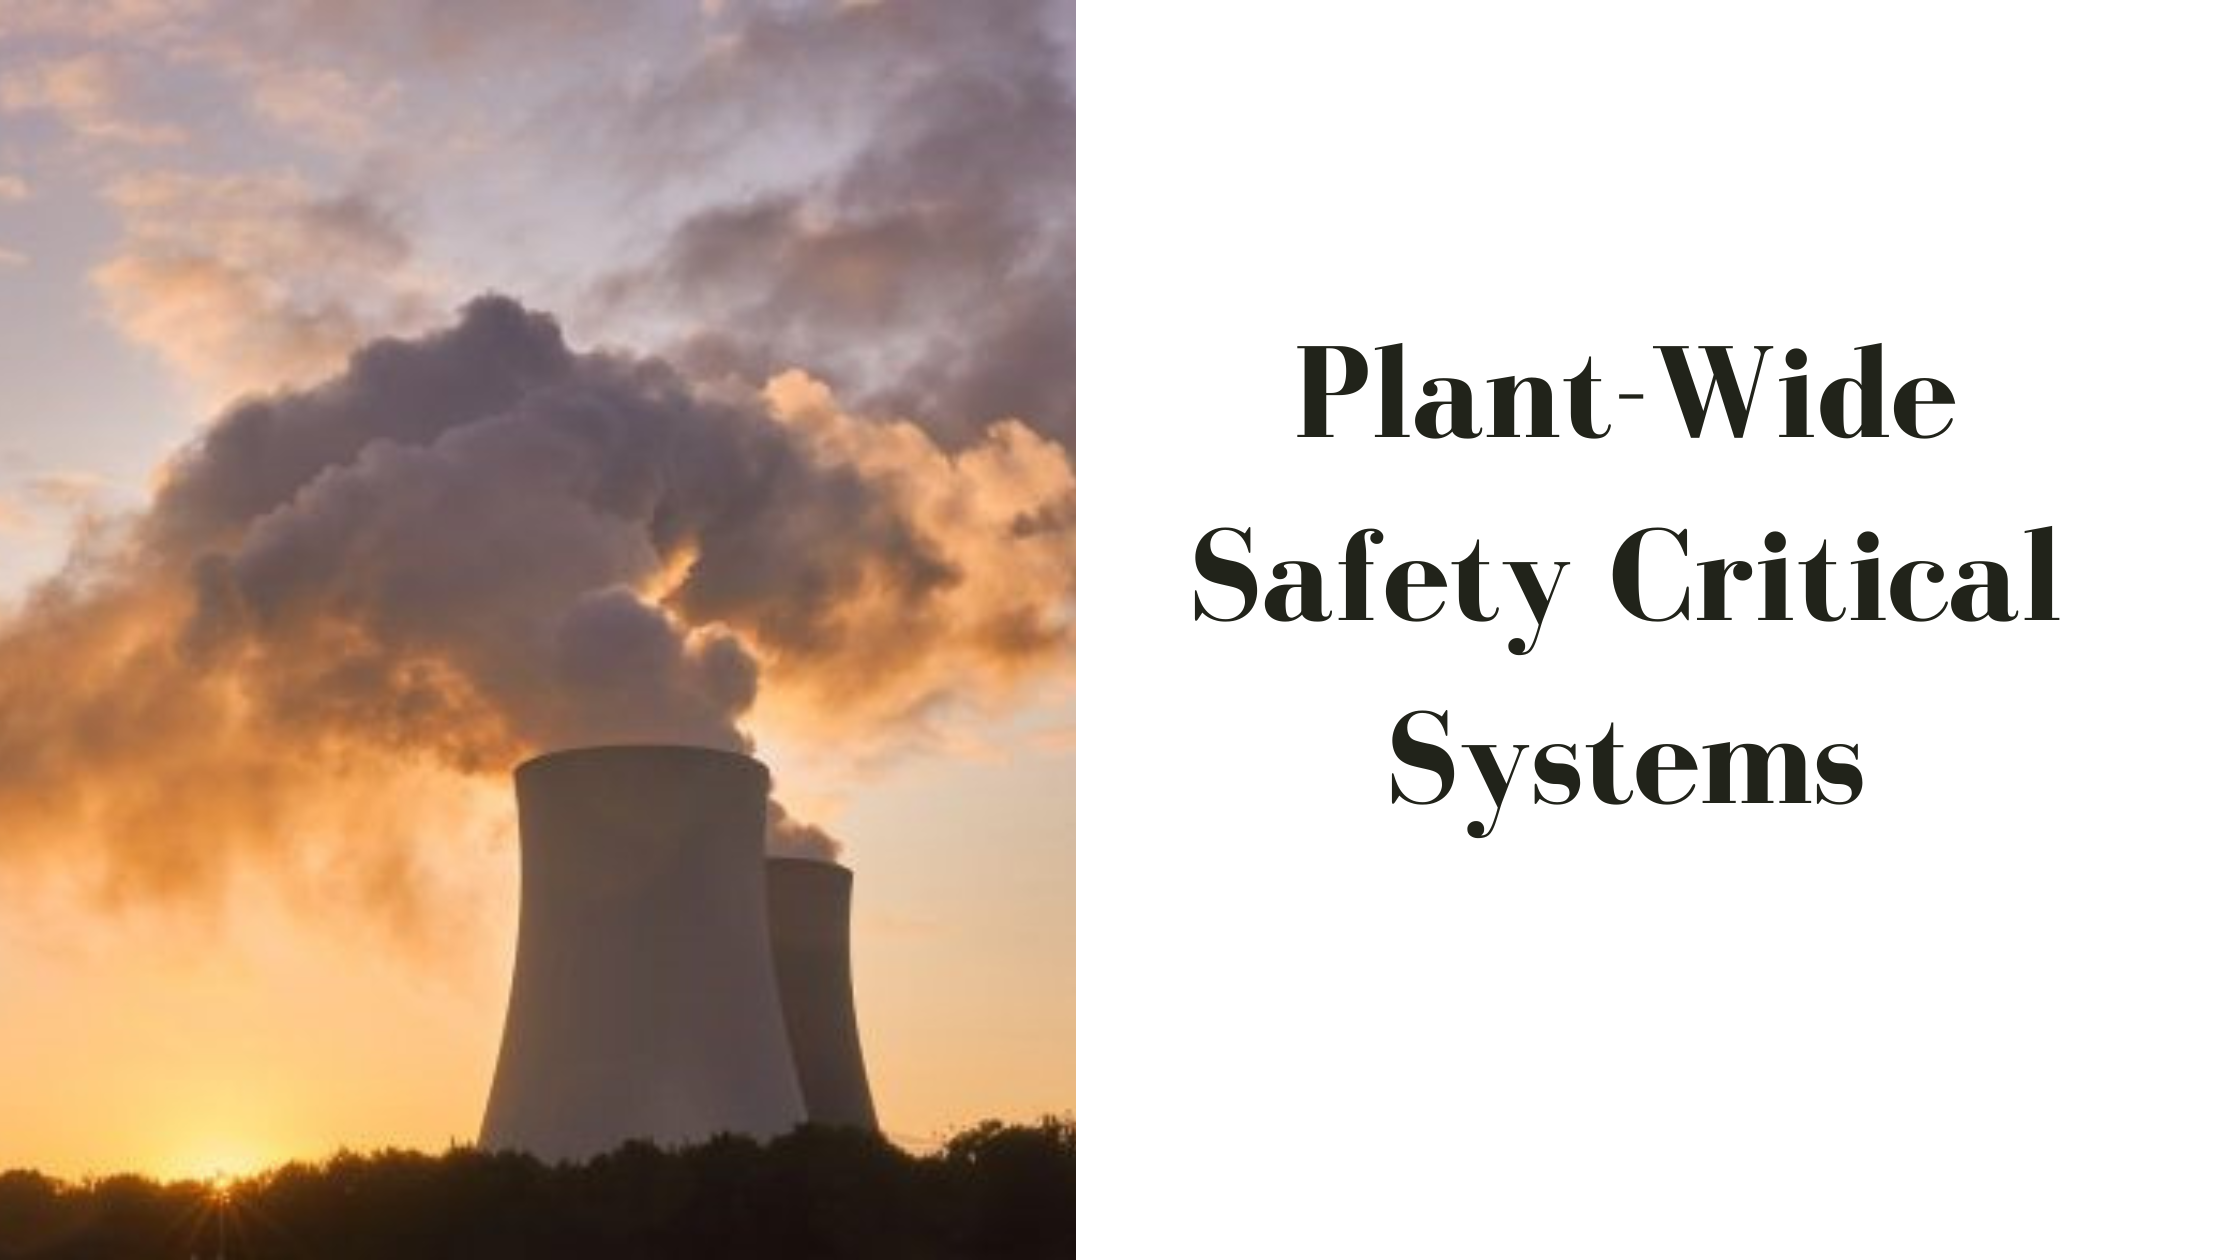 Plant-Wide Safety Critical Systems